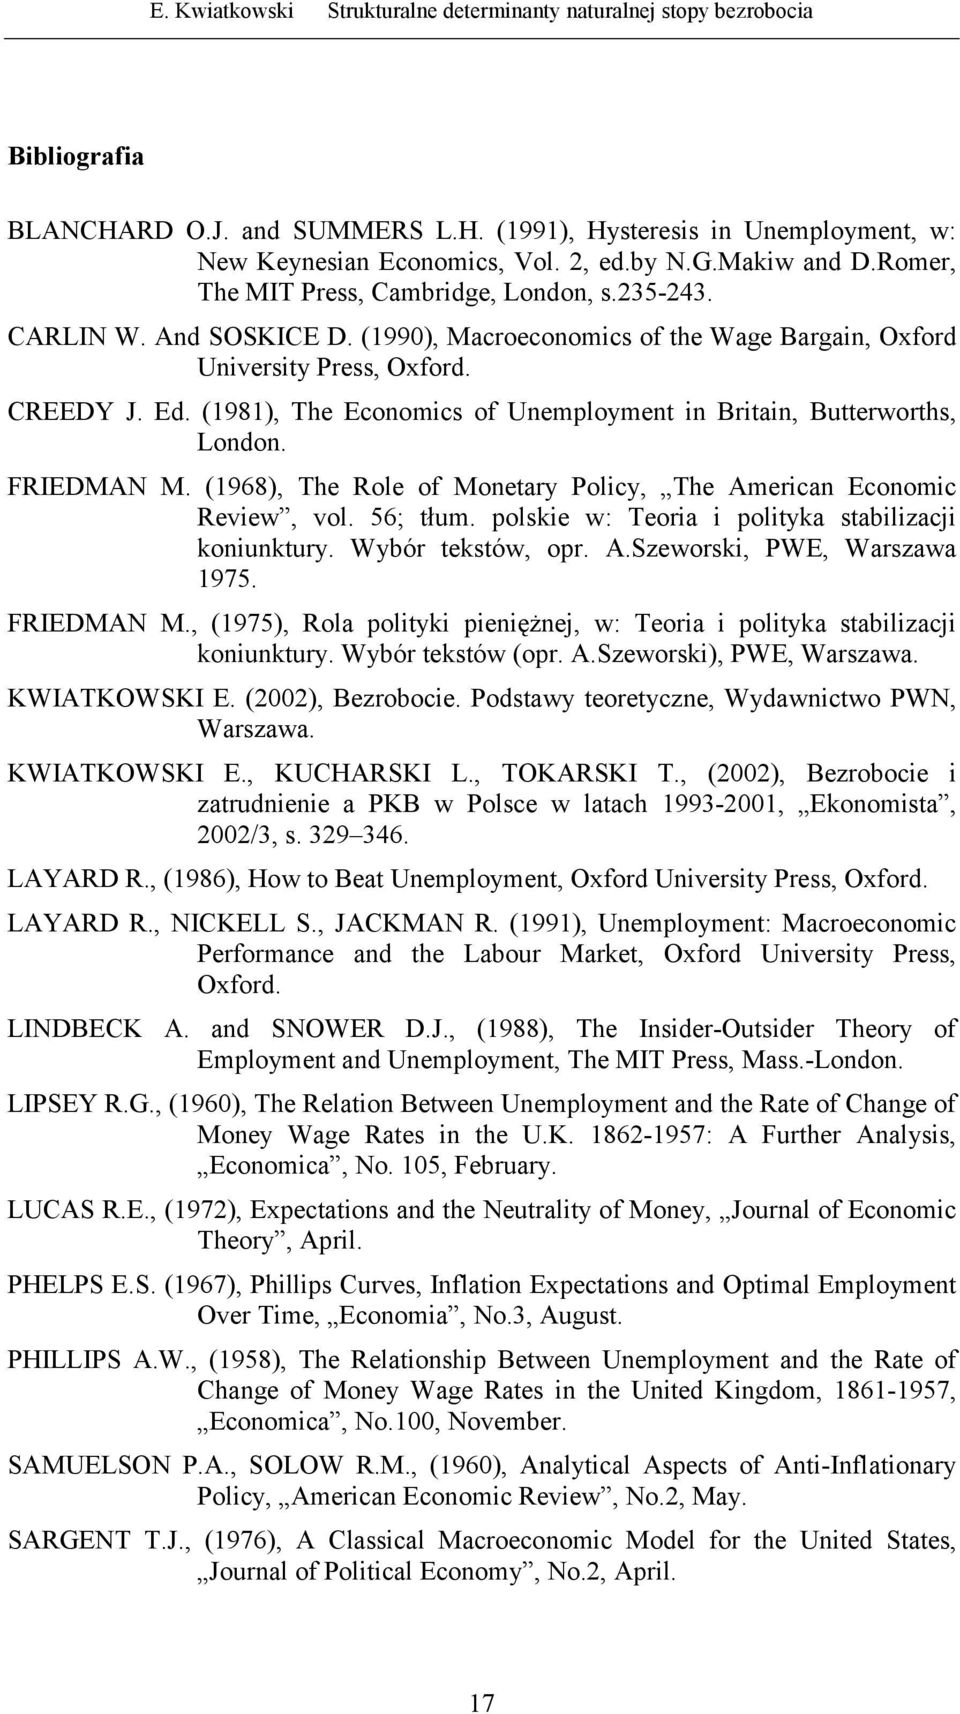 (1981), The Economics of Unemployment in Britain, Butterworths, London. FRIEDMAN M. (1968), The Role of Monetary Policy, The American Economic Review, vol. 56; tłum.